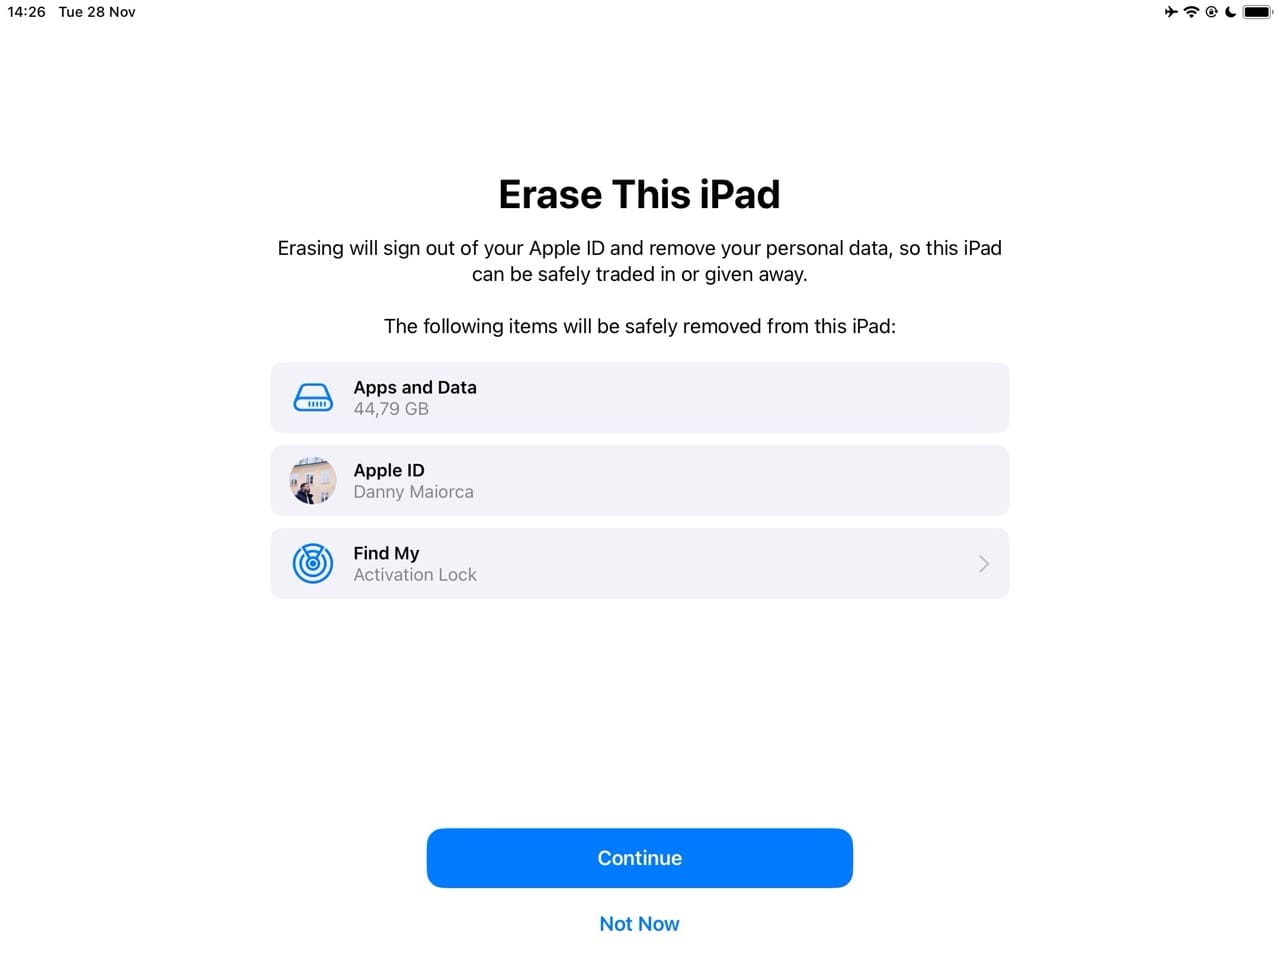 Erase iPad Continuation Page in Settings